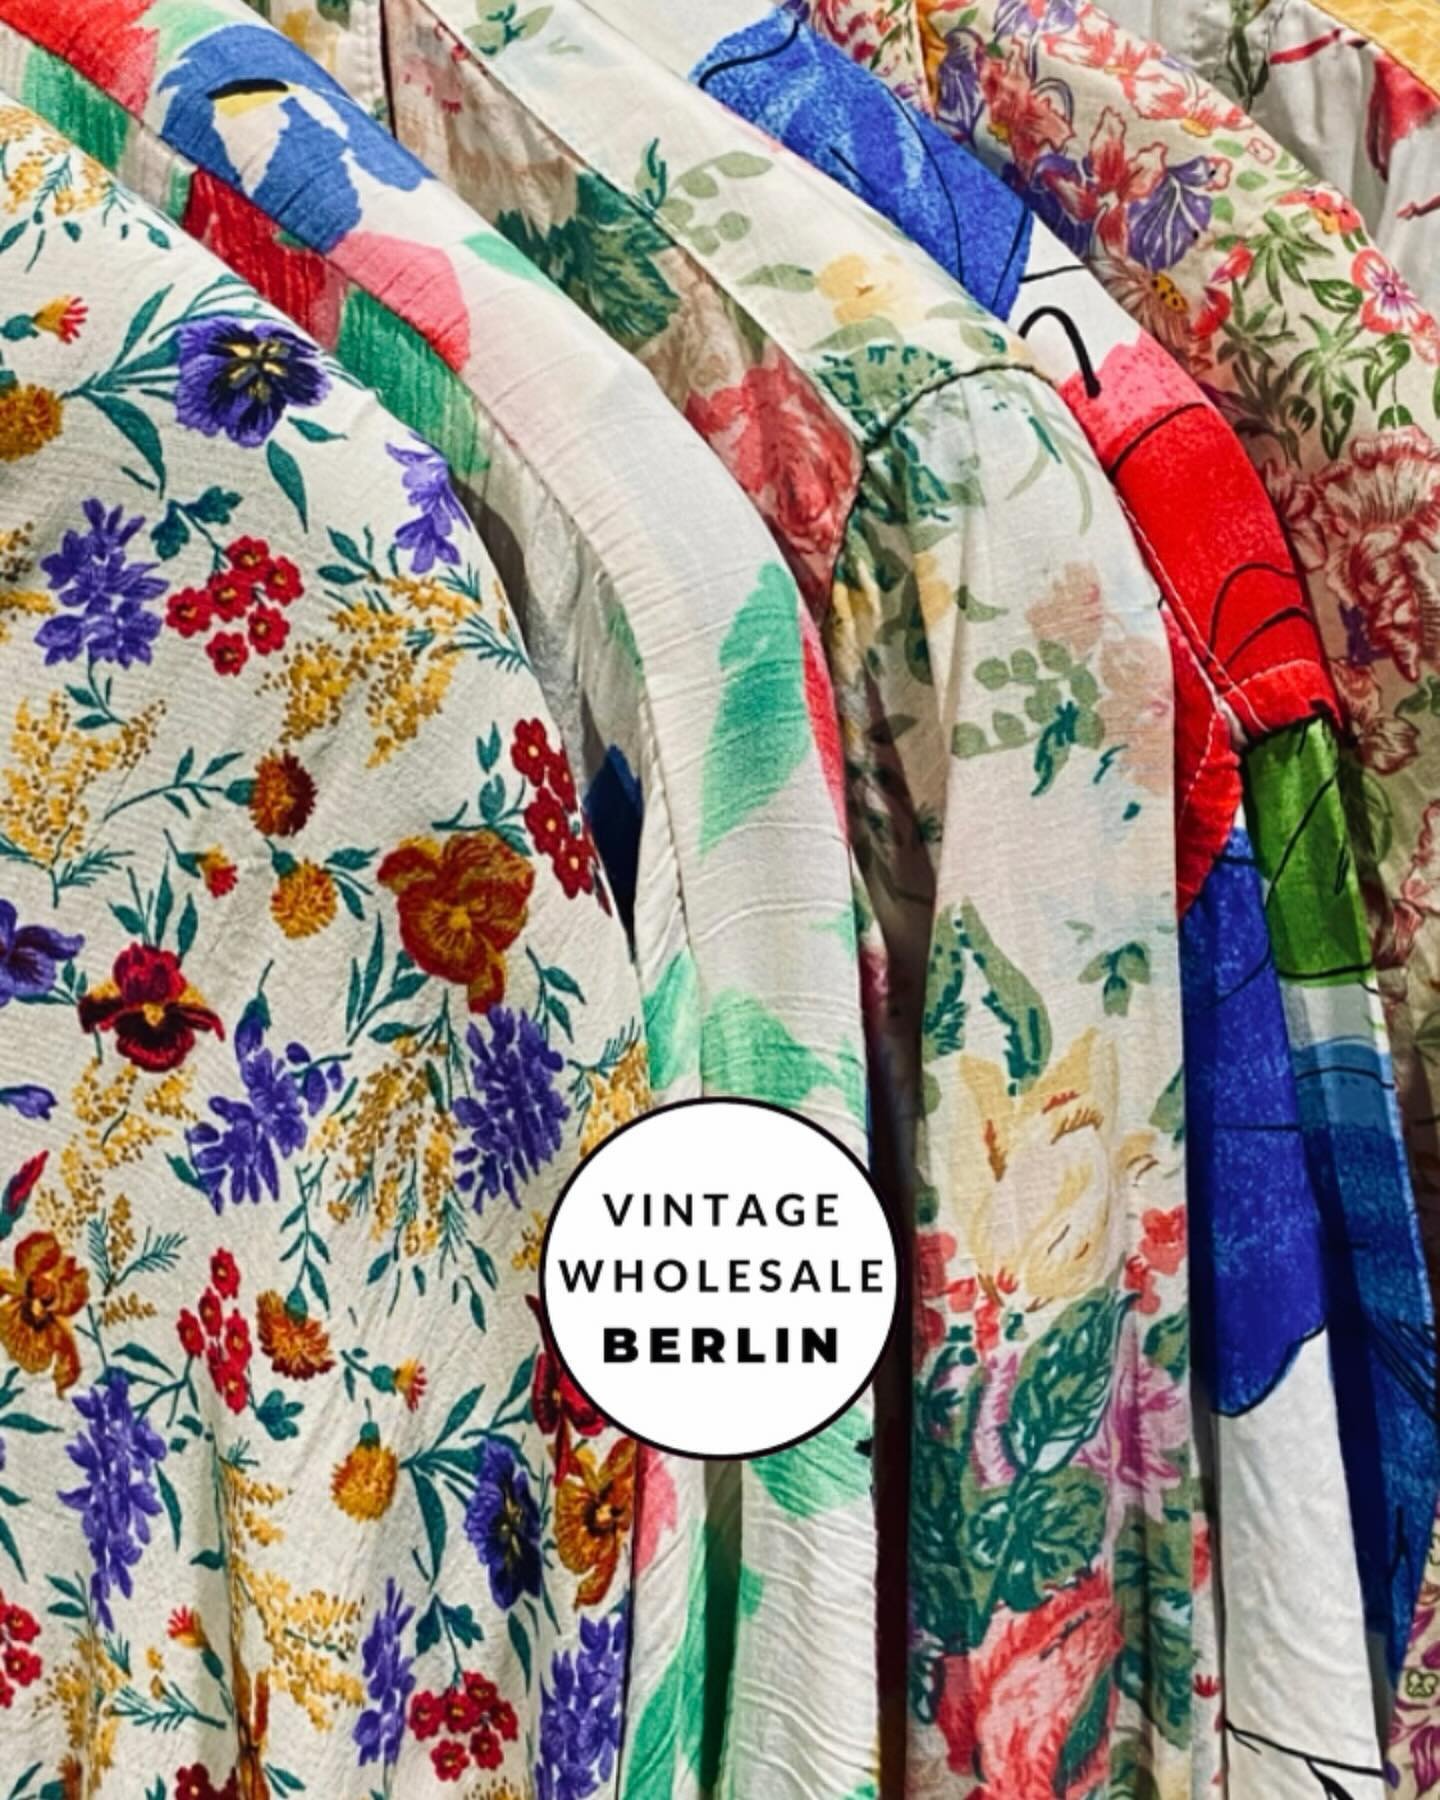 FLORAL VINTAGE PIECES FOR LADIES 
👇 @vintage_wholesale_berlin 👇

It&rsquo;s spring in Berlin and the city is in full bloom 💐🌸🌻🌹🌺 even in our warehouse you can find flowers everywhere on our vintage pieces☺️

Enjoy this beautiful bouquet of flo